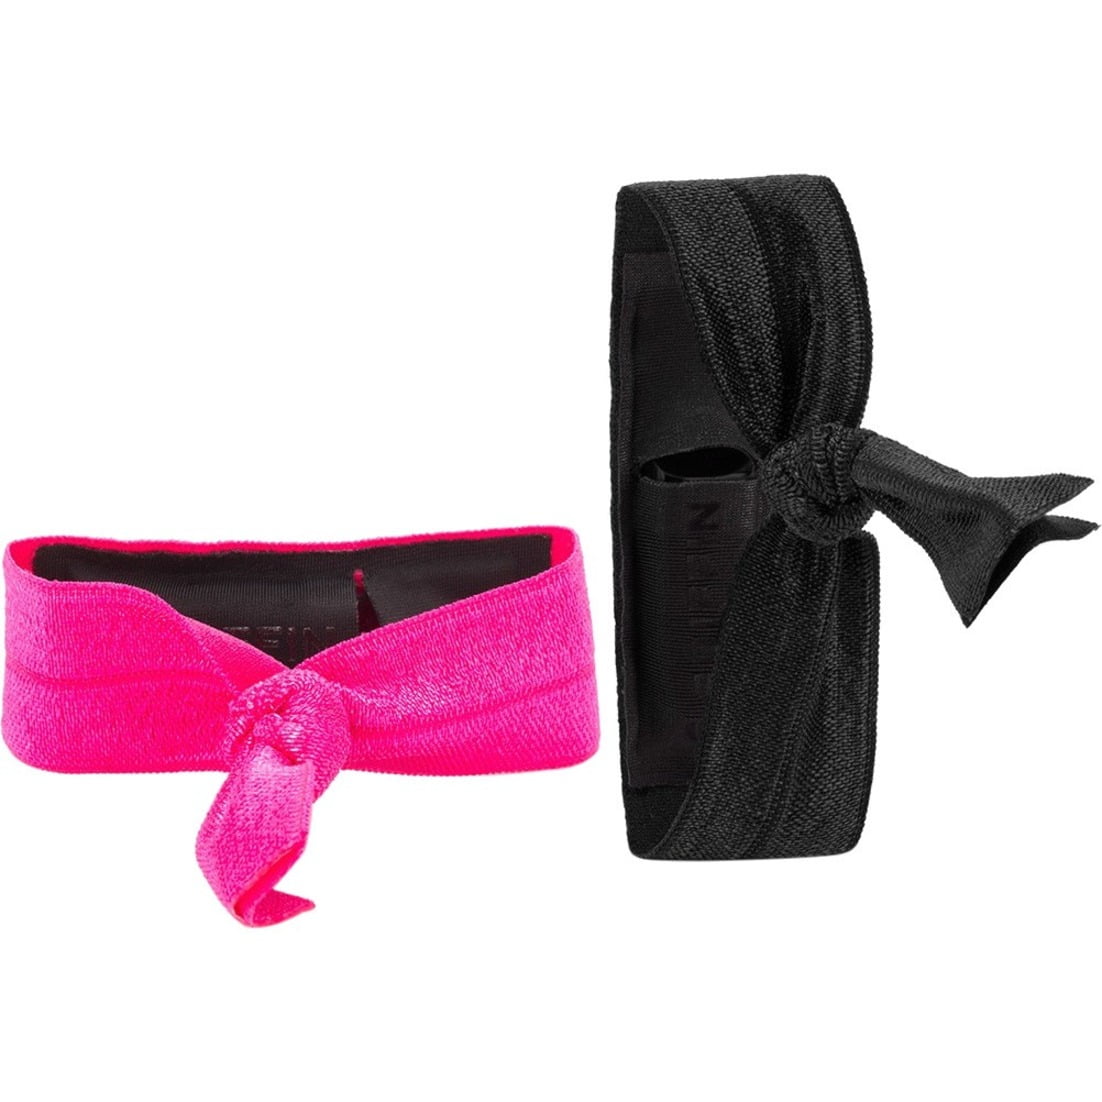 Griffin Ribbon Wristband for Fitness Trackers, Black/Pink - Walmart.com